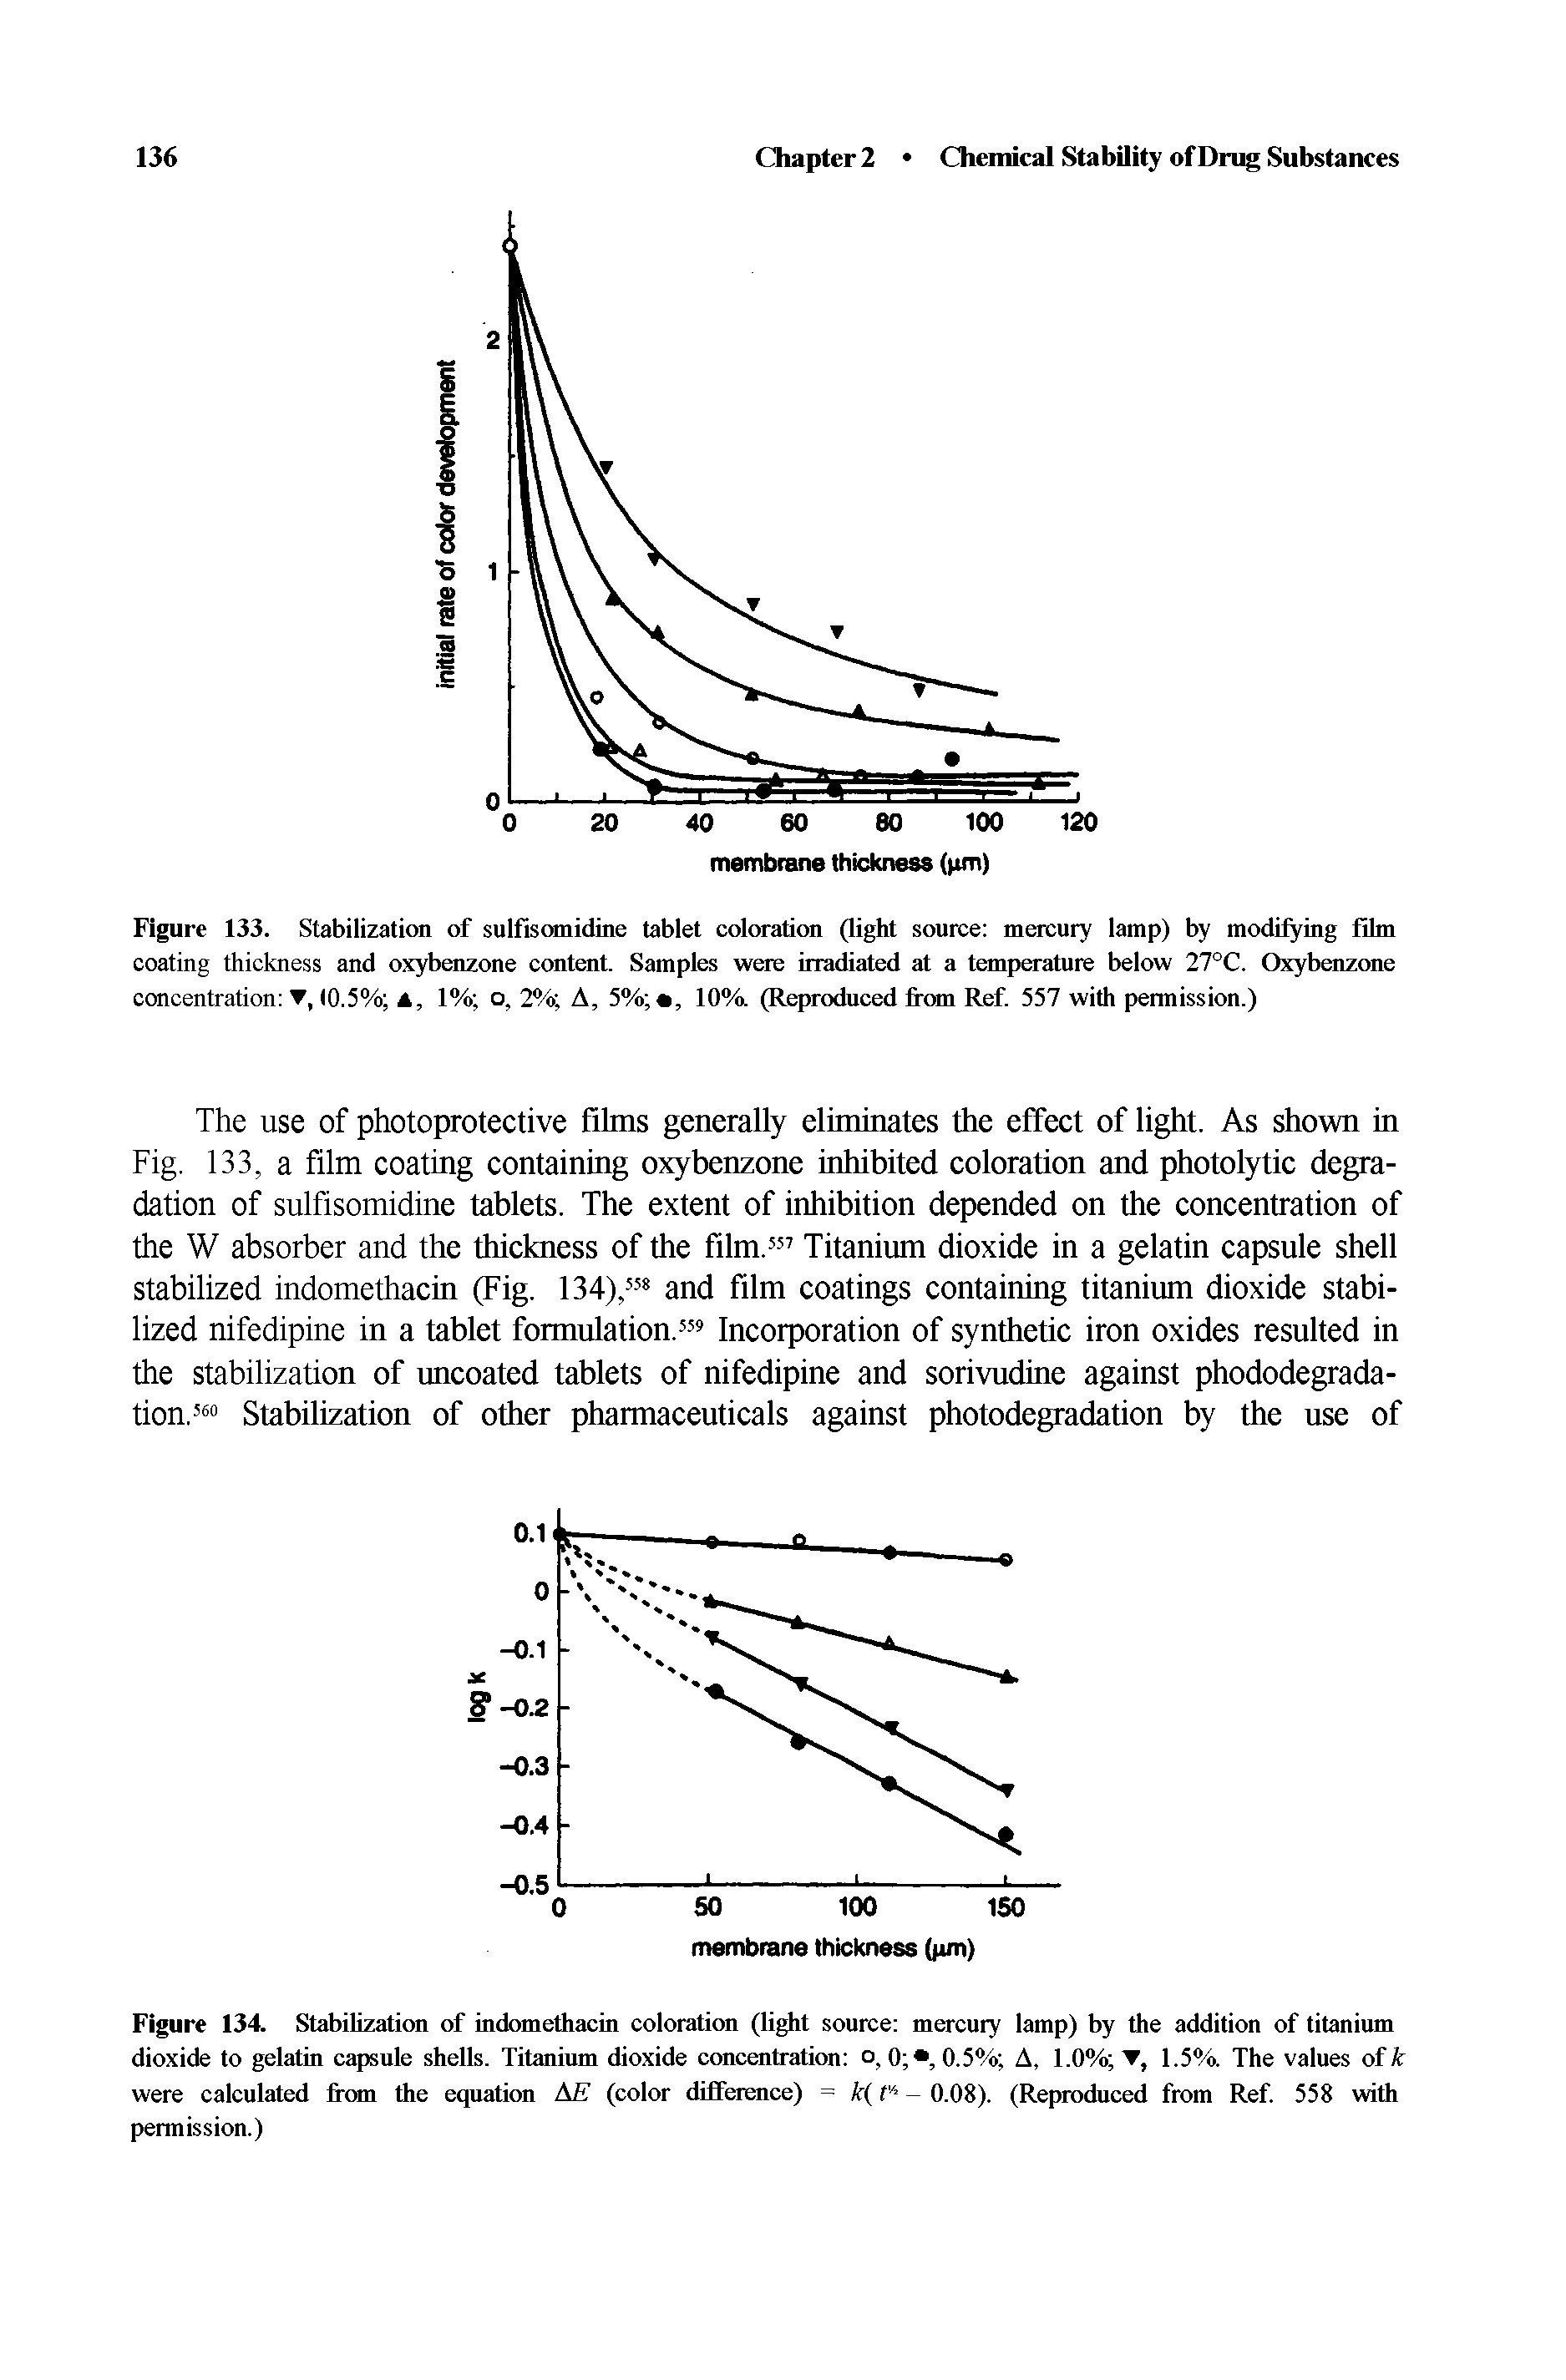 Figure 133. Stabilization of sulfisomidine tablet coloration (light source mercury lamp) by modifying film coating thickness and oxybenzone content. Samples were irradiated at a temperature below 27°C. Oxybenzone concentration , (0.5% A, 1% o, 2% A, 5% , 10%. (Reproduced from Ref. 557 with permission.)...